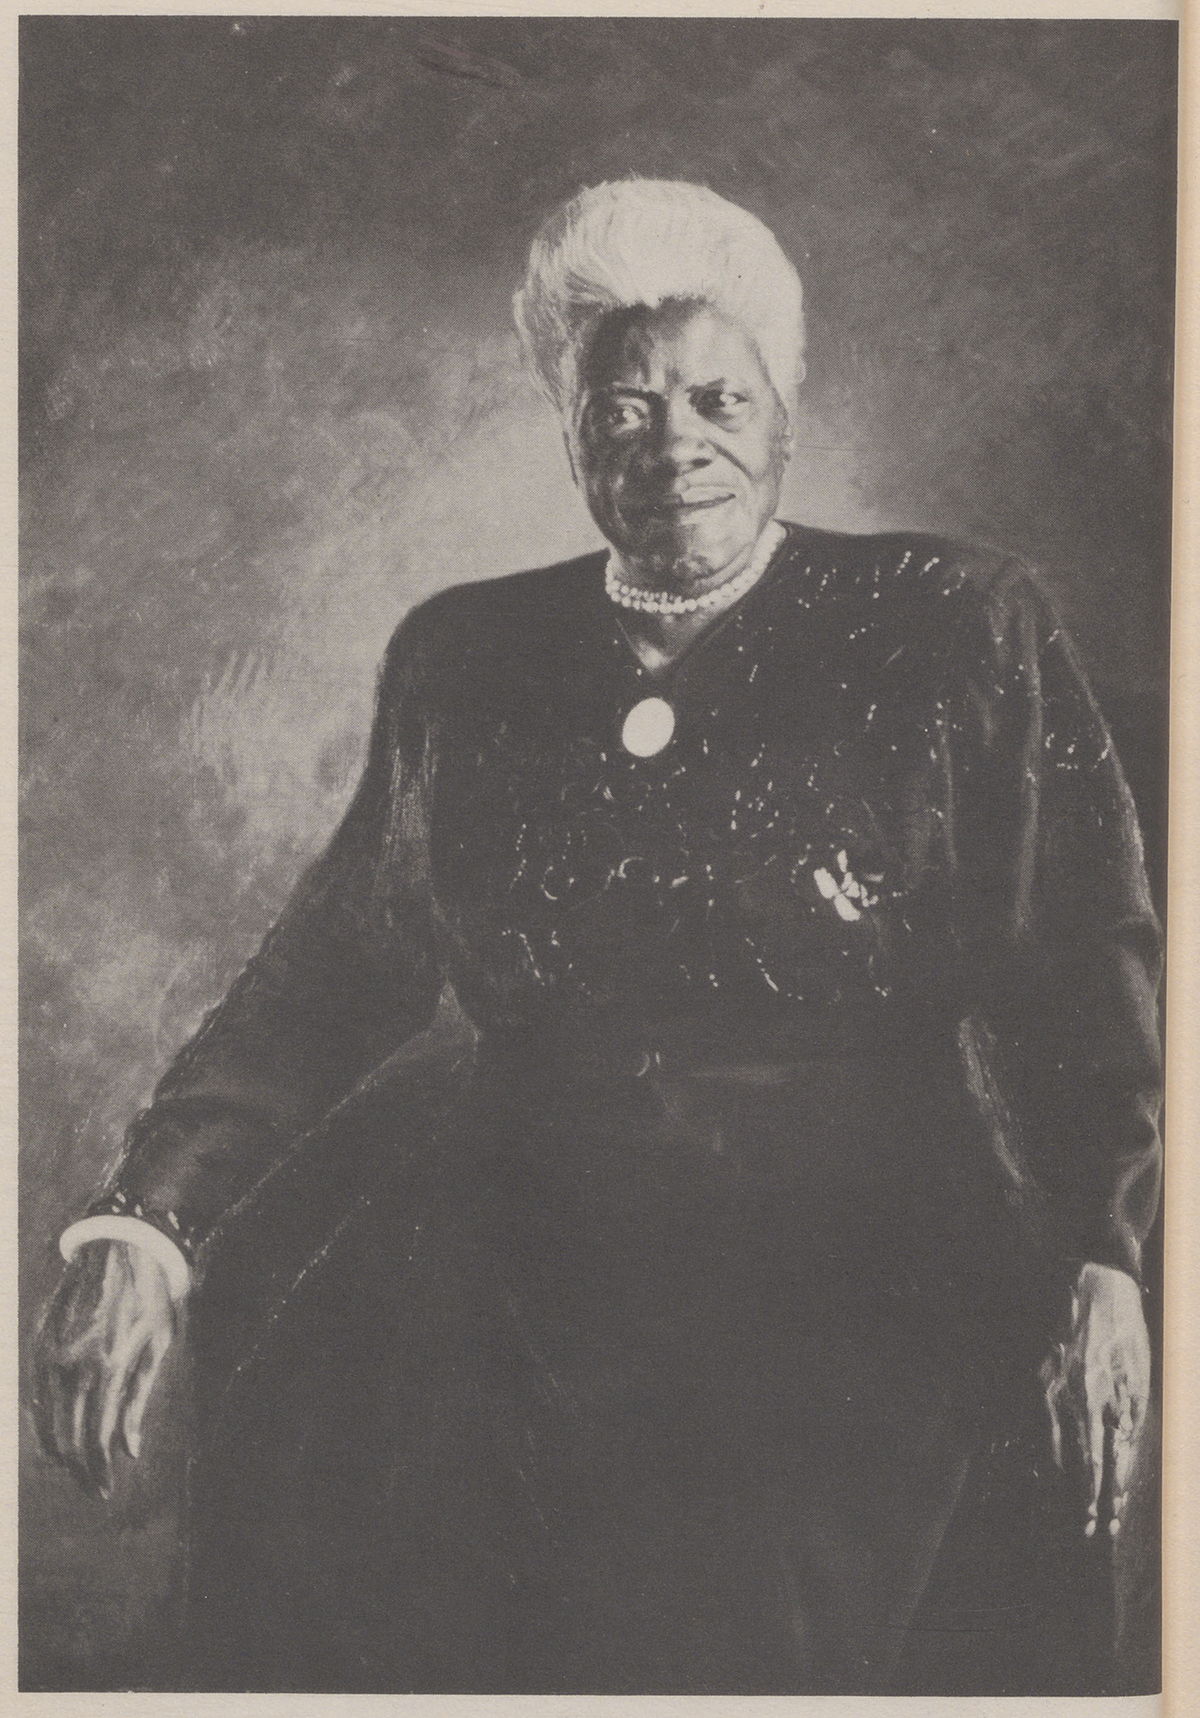 Painting of Mary McLeod Bethune by William Bruckner. From Mary McLeod Bethune: A Biography by Rackham Holt.